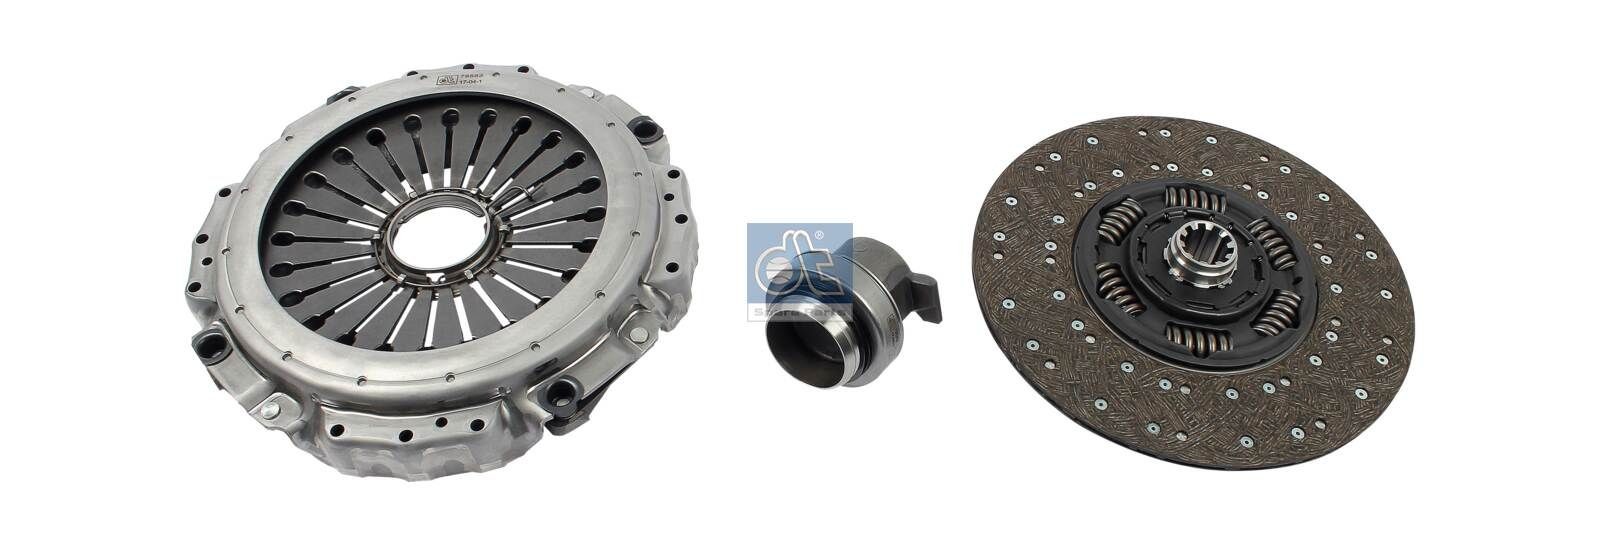 3400 700 378 DT Spare Parts with clutch release bearing, 430mm Ø: 430mm Clutch replacement kit 7.90515 buy